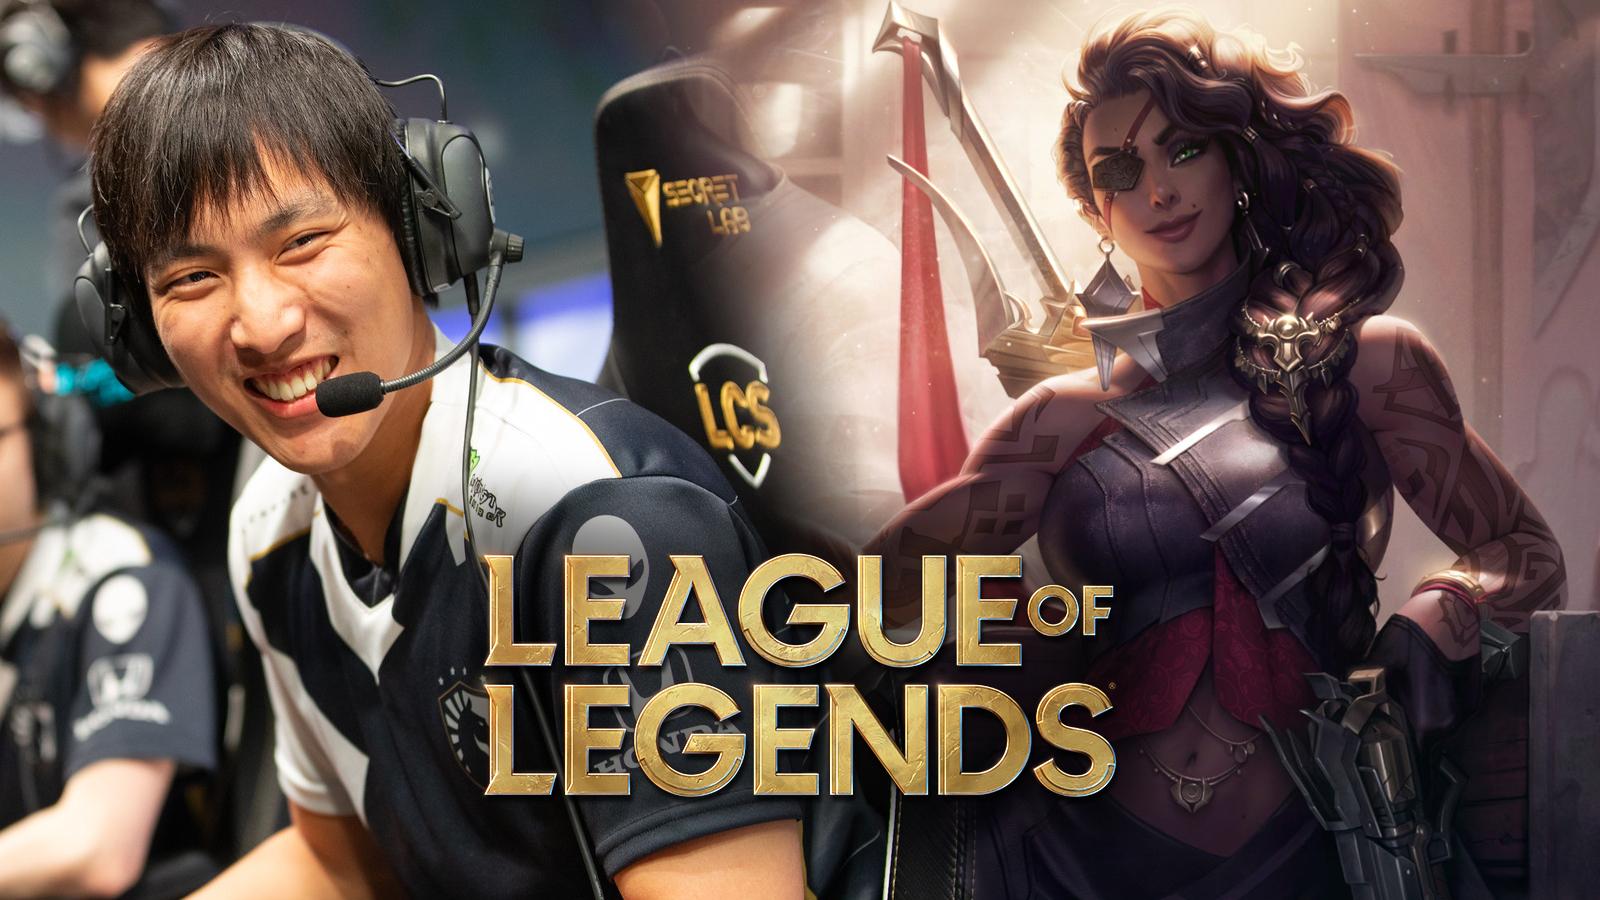 Doublelift and Samira in League of Legends